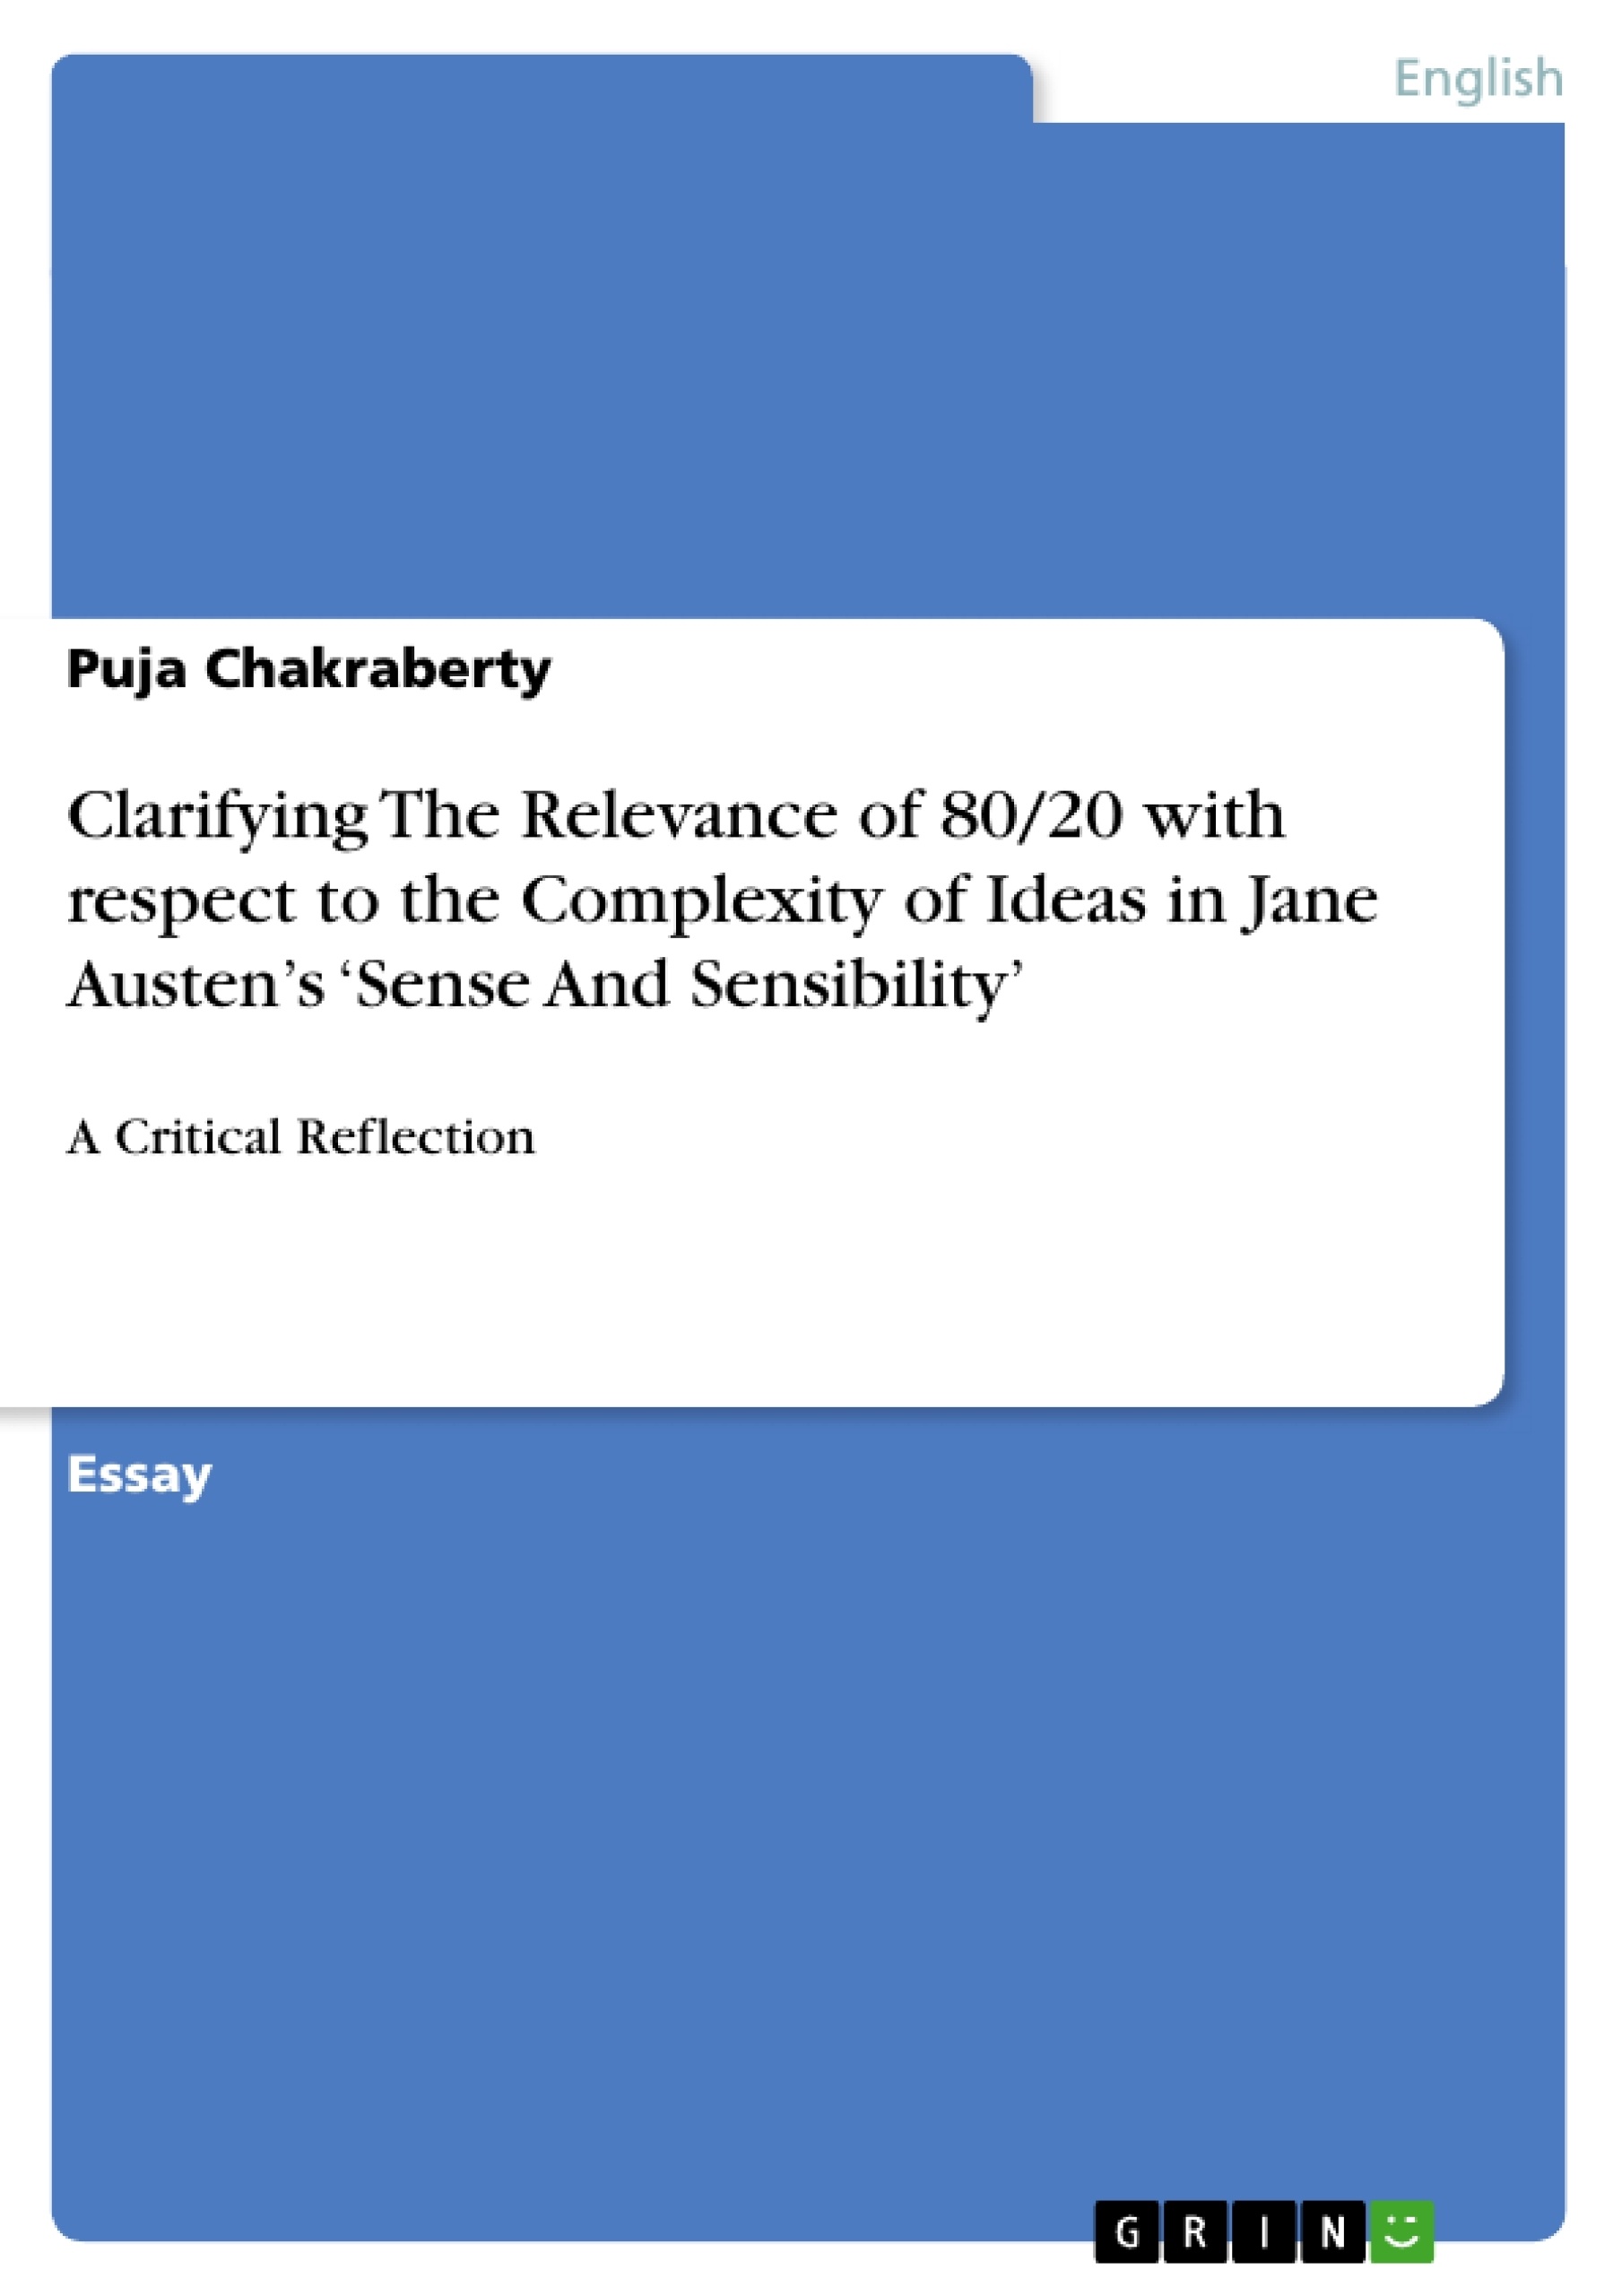 Titel: Clarifying The Relevance of 80/20 with respect to the Complexity of Ideas in Jane Austen’s ‘Sense And Sensibility’